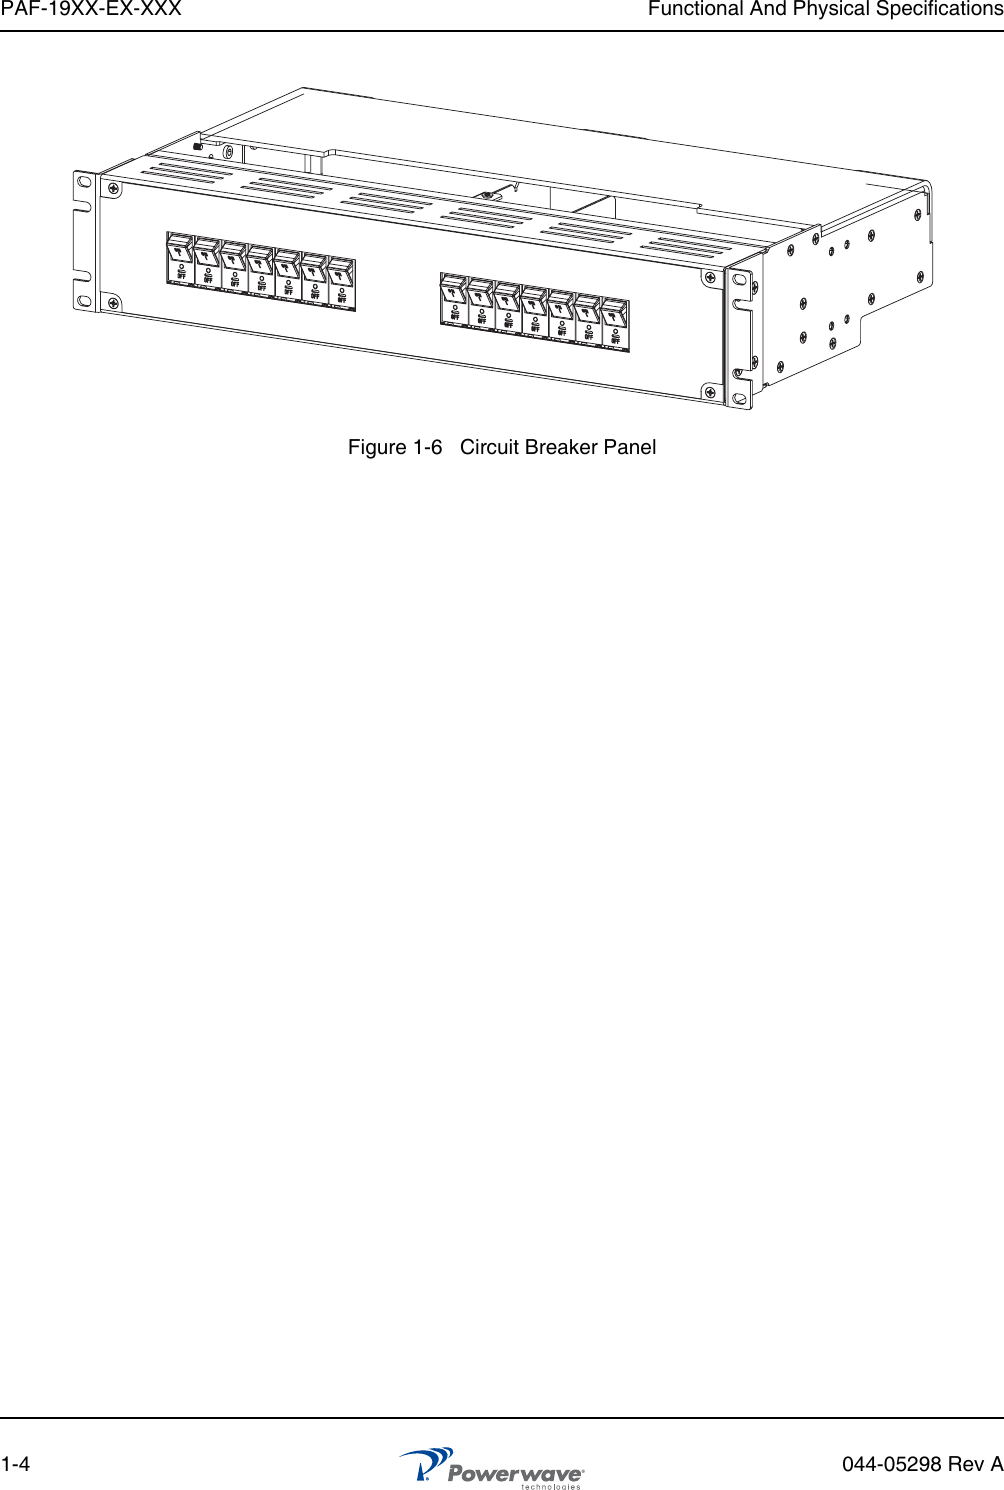 PAF-19XX-EX-XXX Functional And Physical Specifications1-4 044-05298 Rev AFigure 1-6   Circuit Breaker Panel 